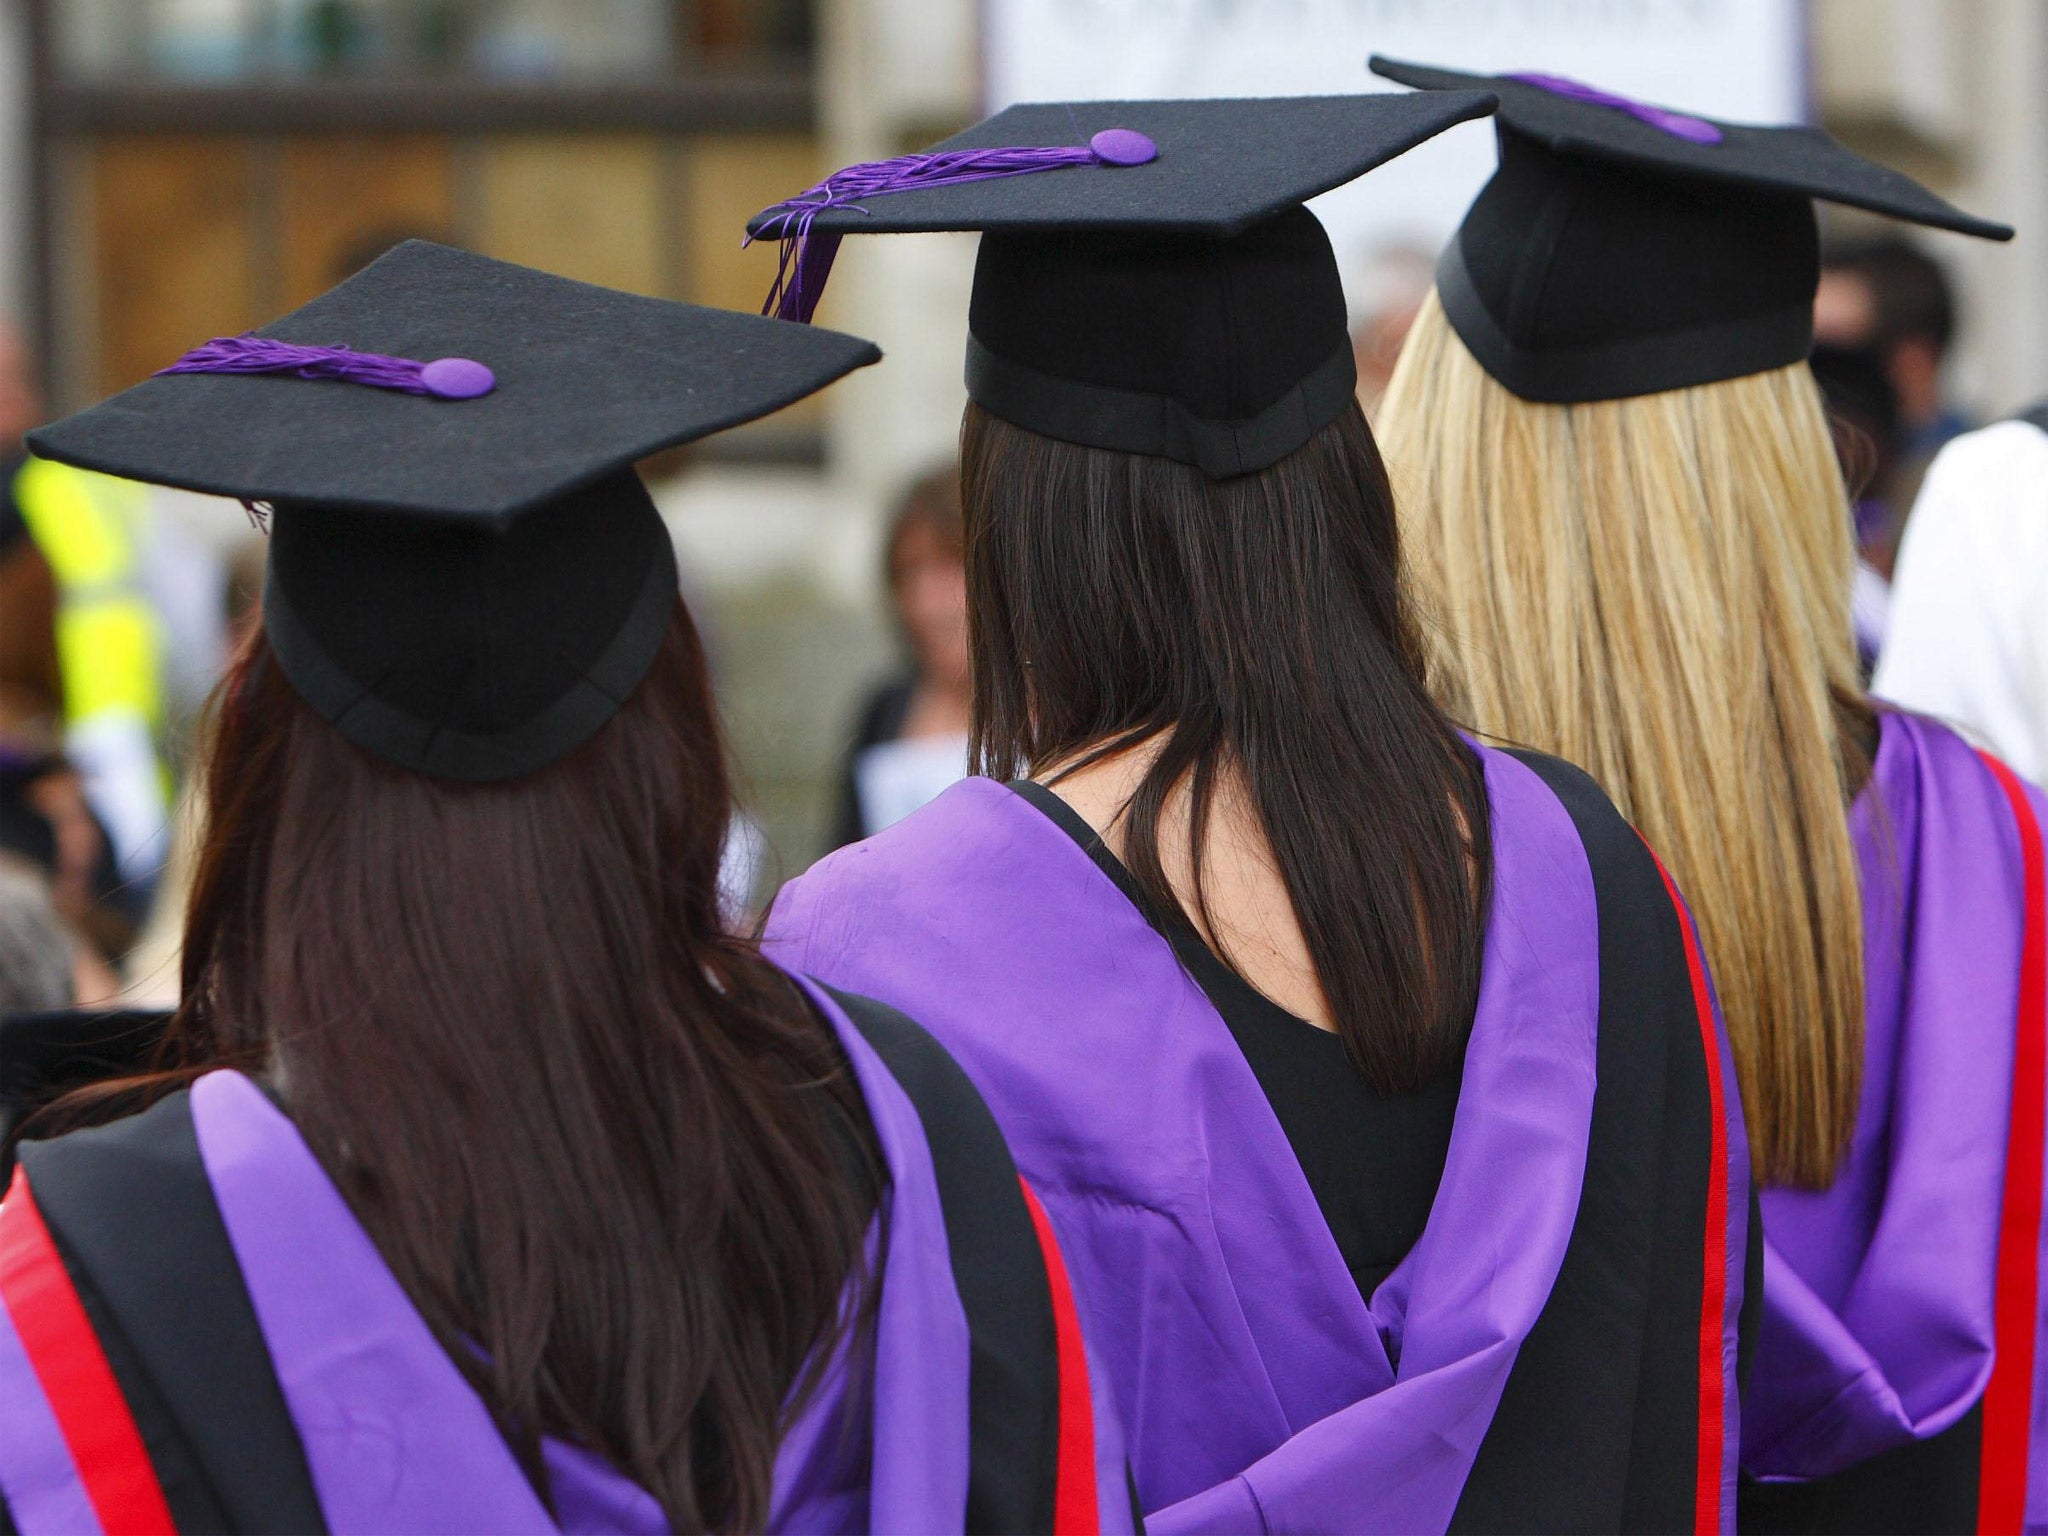 One in two women in the UK now have university degrees